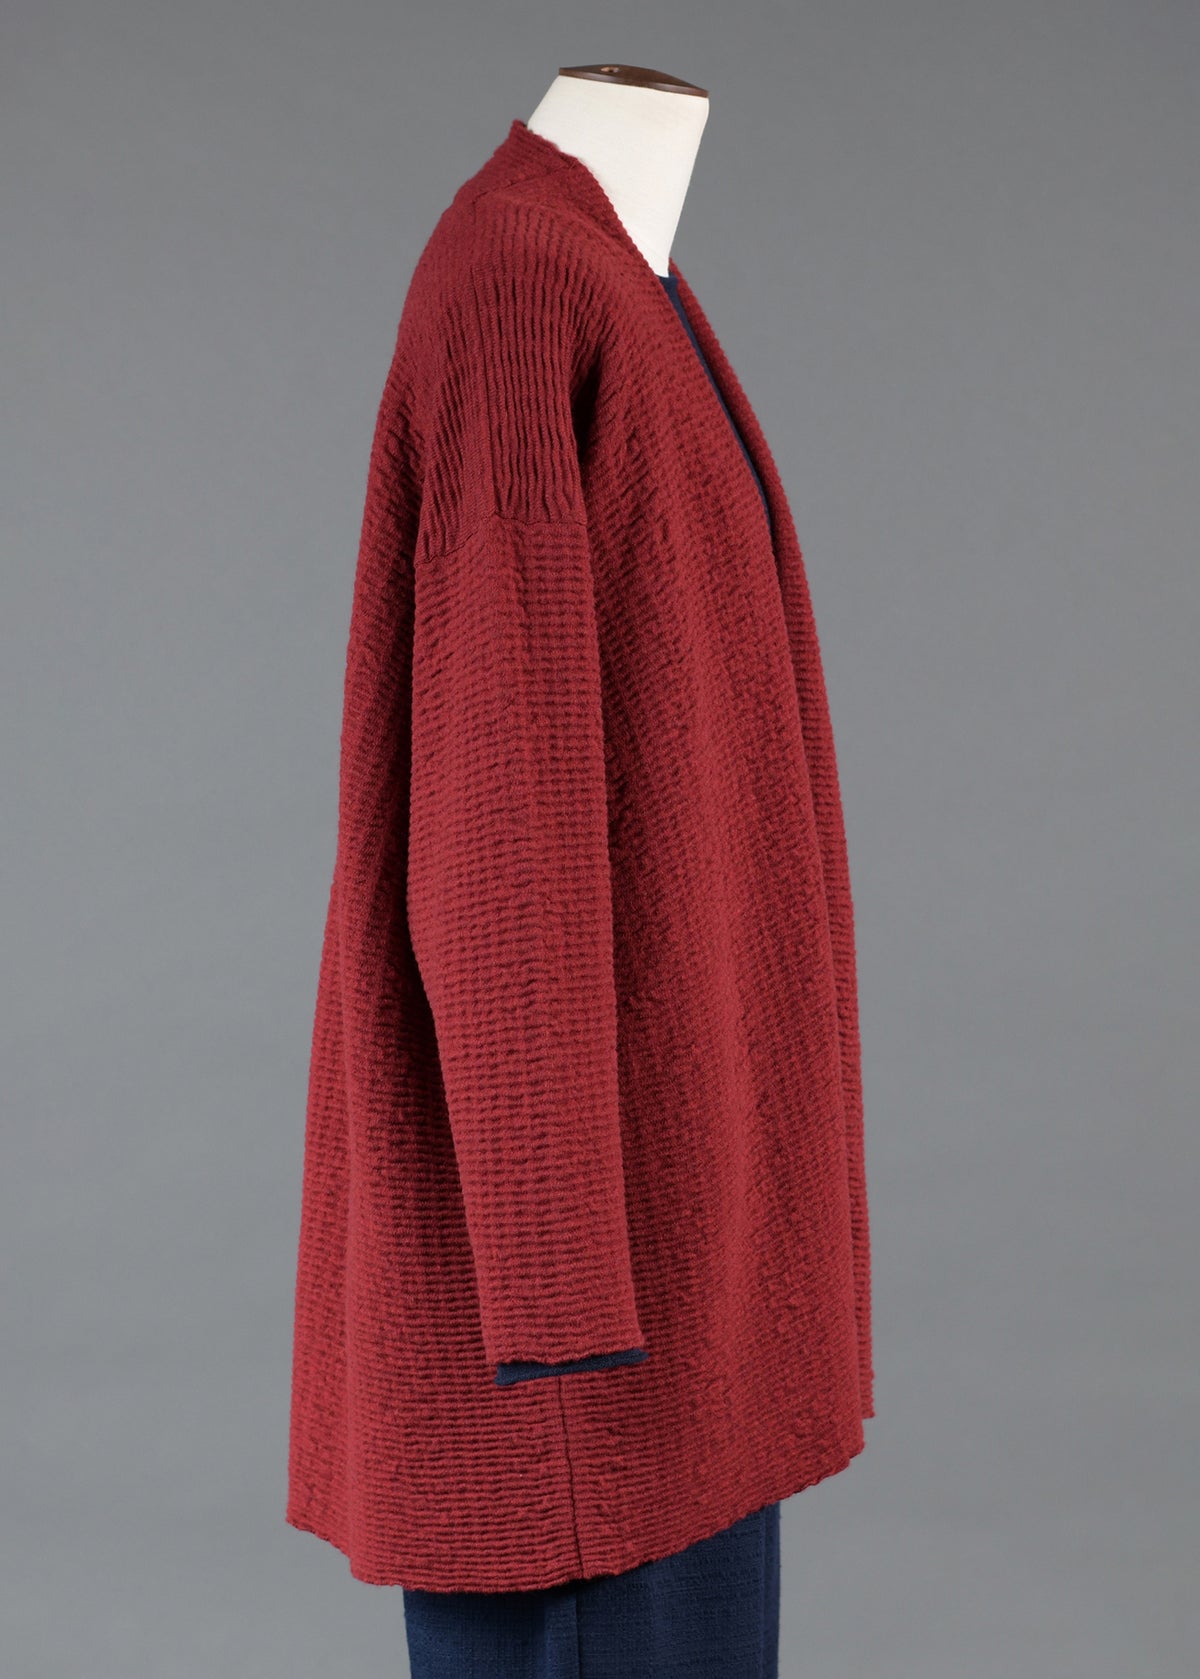 knitted ripple cashmere slim open cardigan - long plus